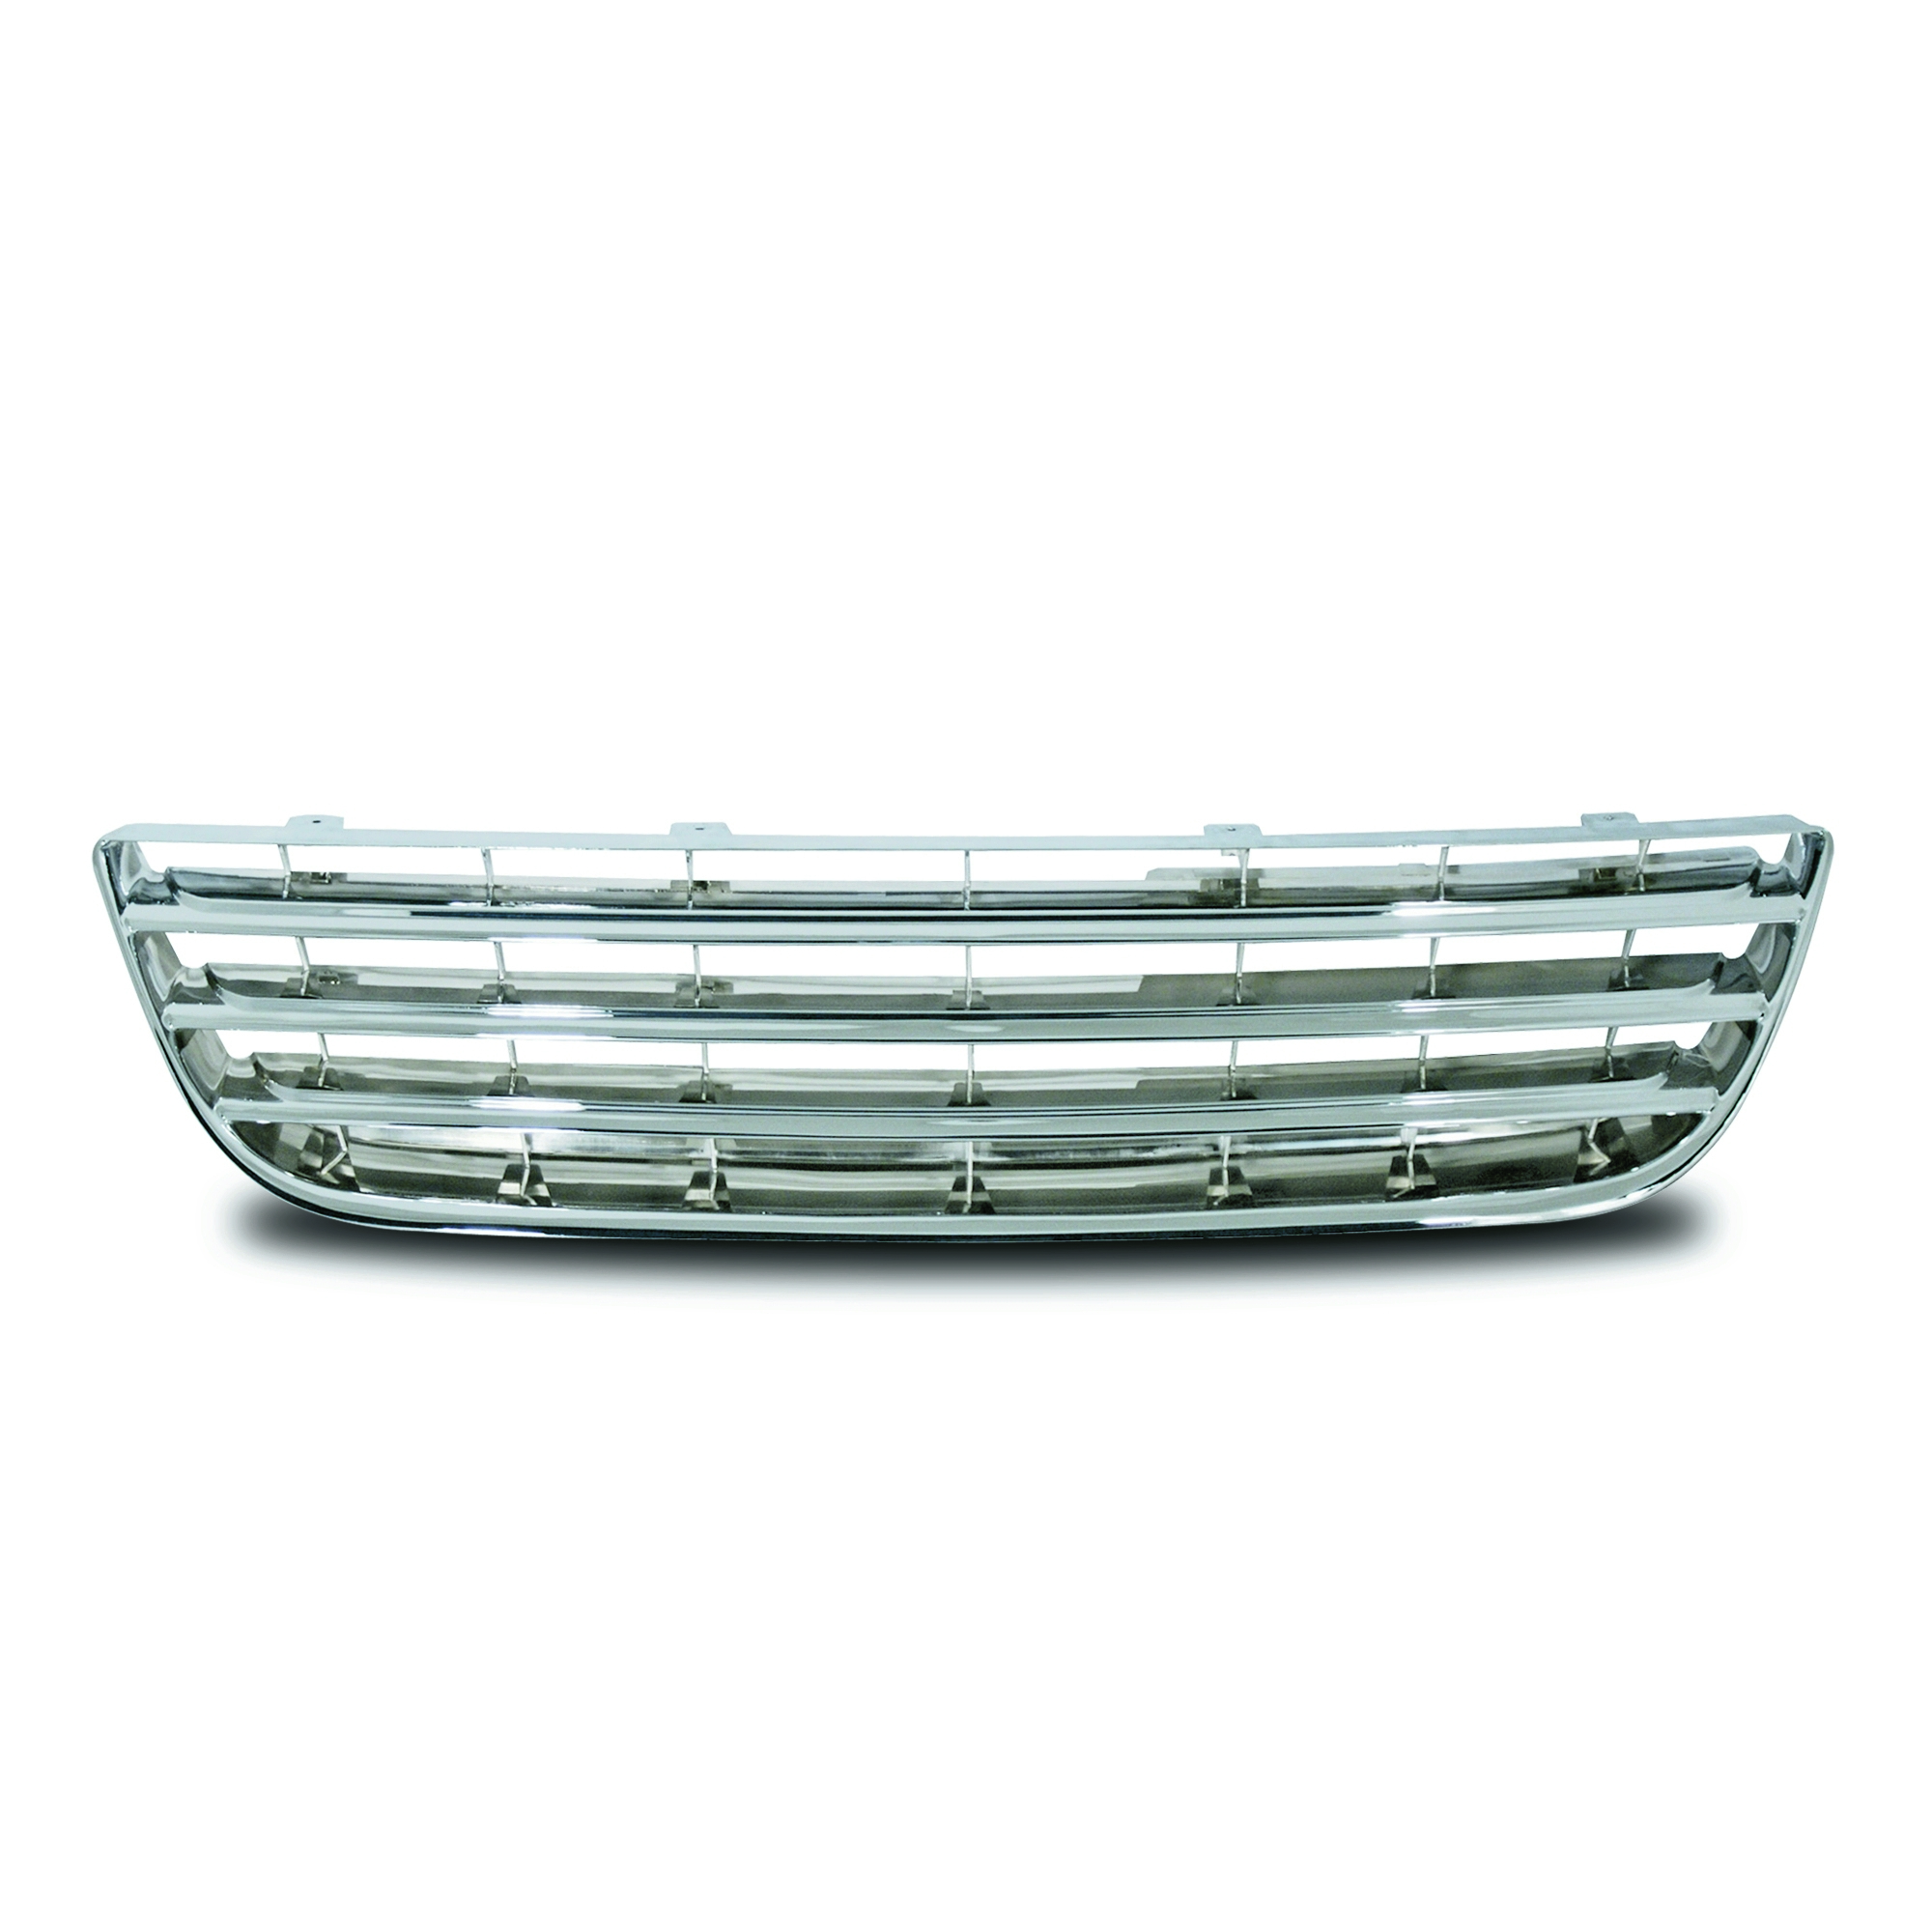 Polo 9N Tuning Badgeless Grill – Best VW Parts